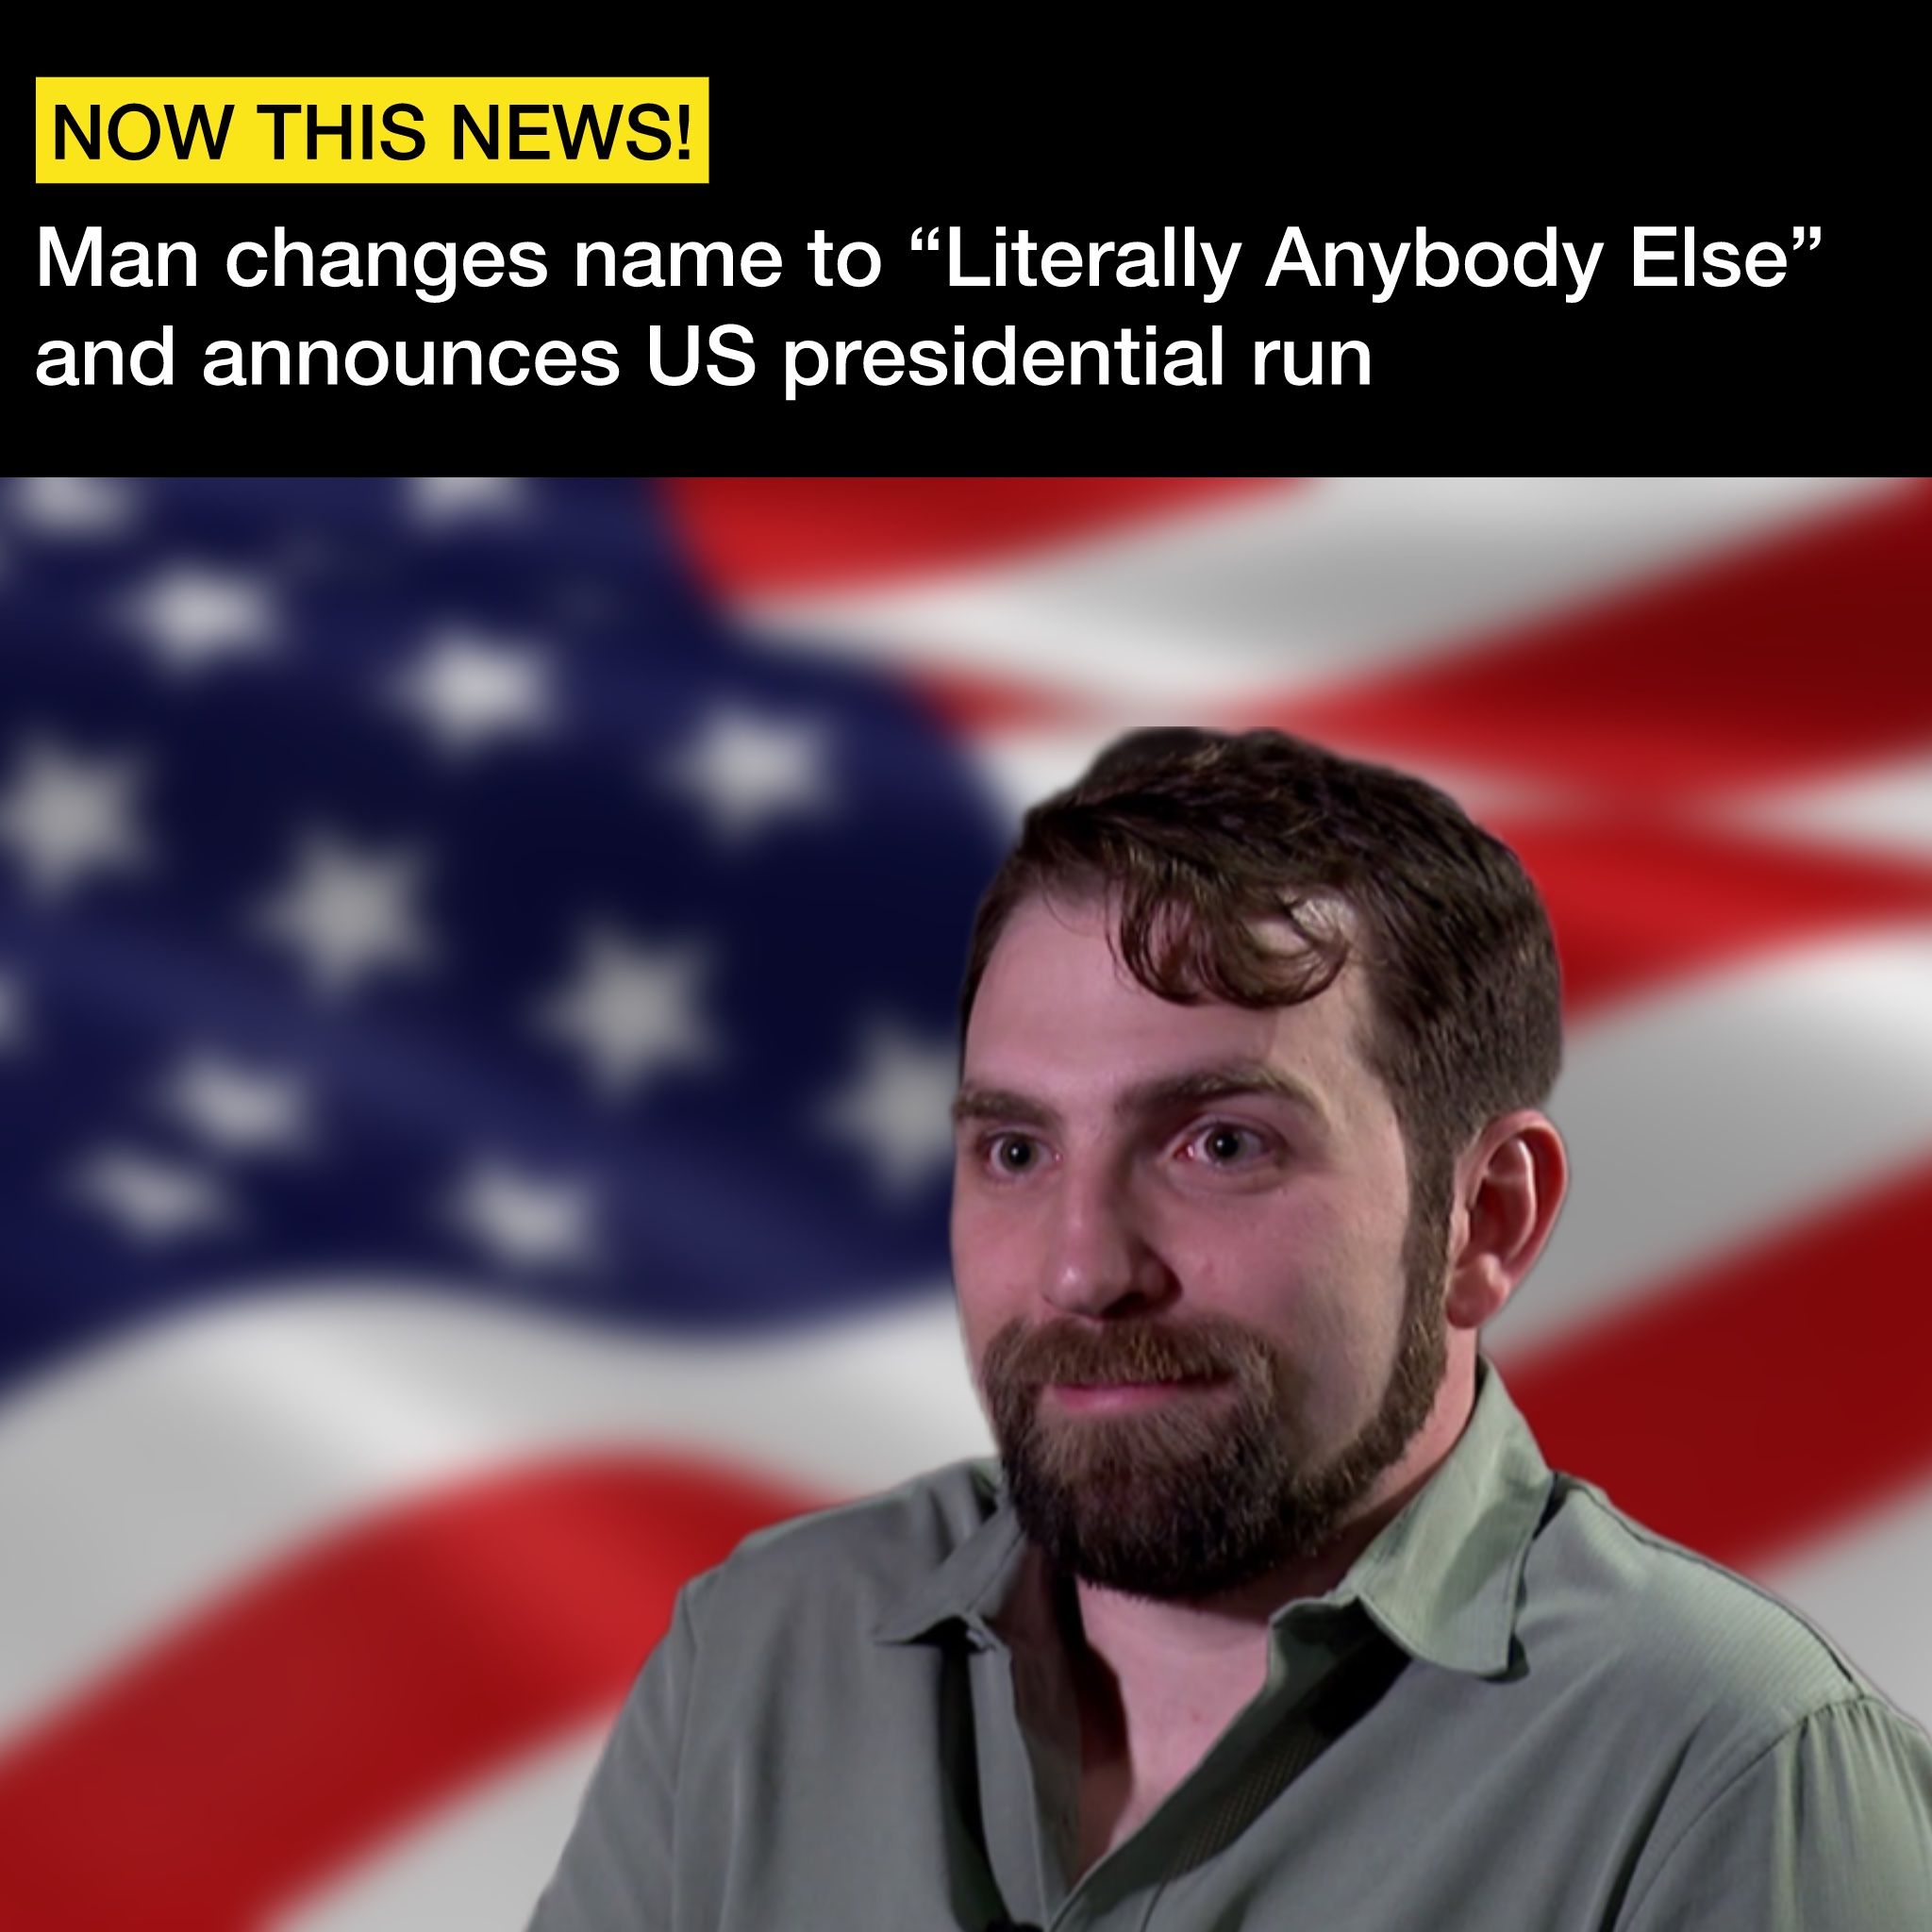 Man Changes Name to “Literally Anybody Else” and Announces US Presidential Run